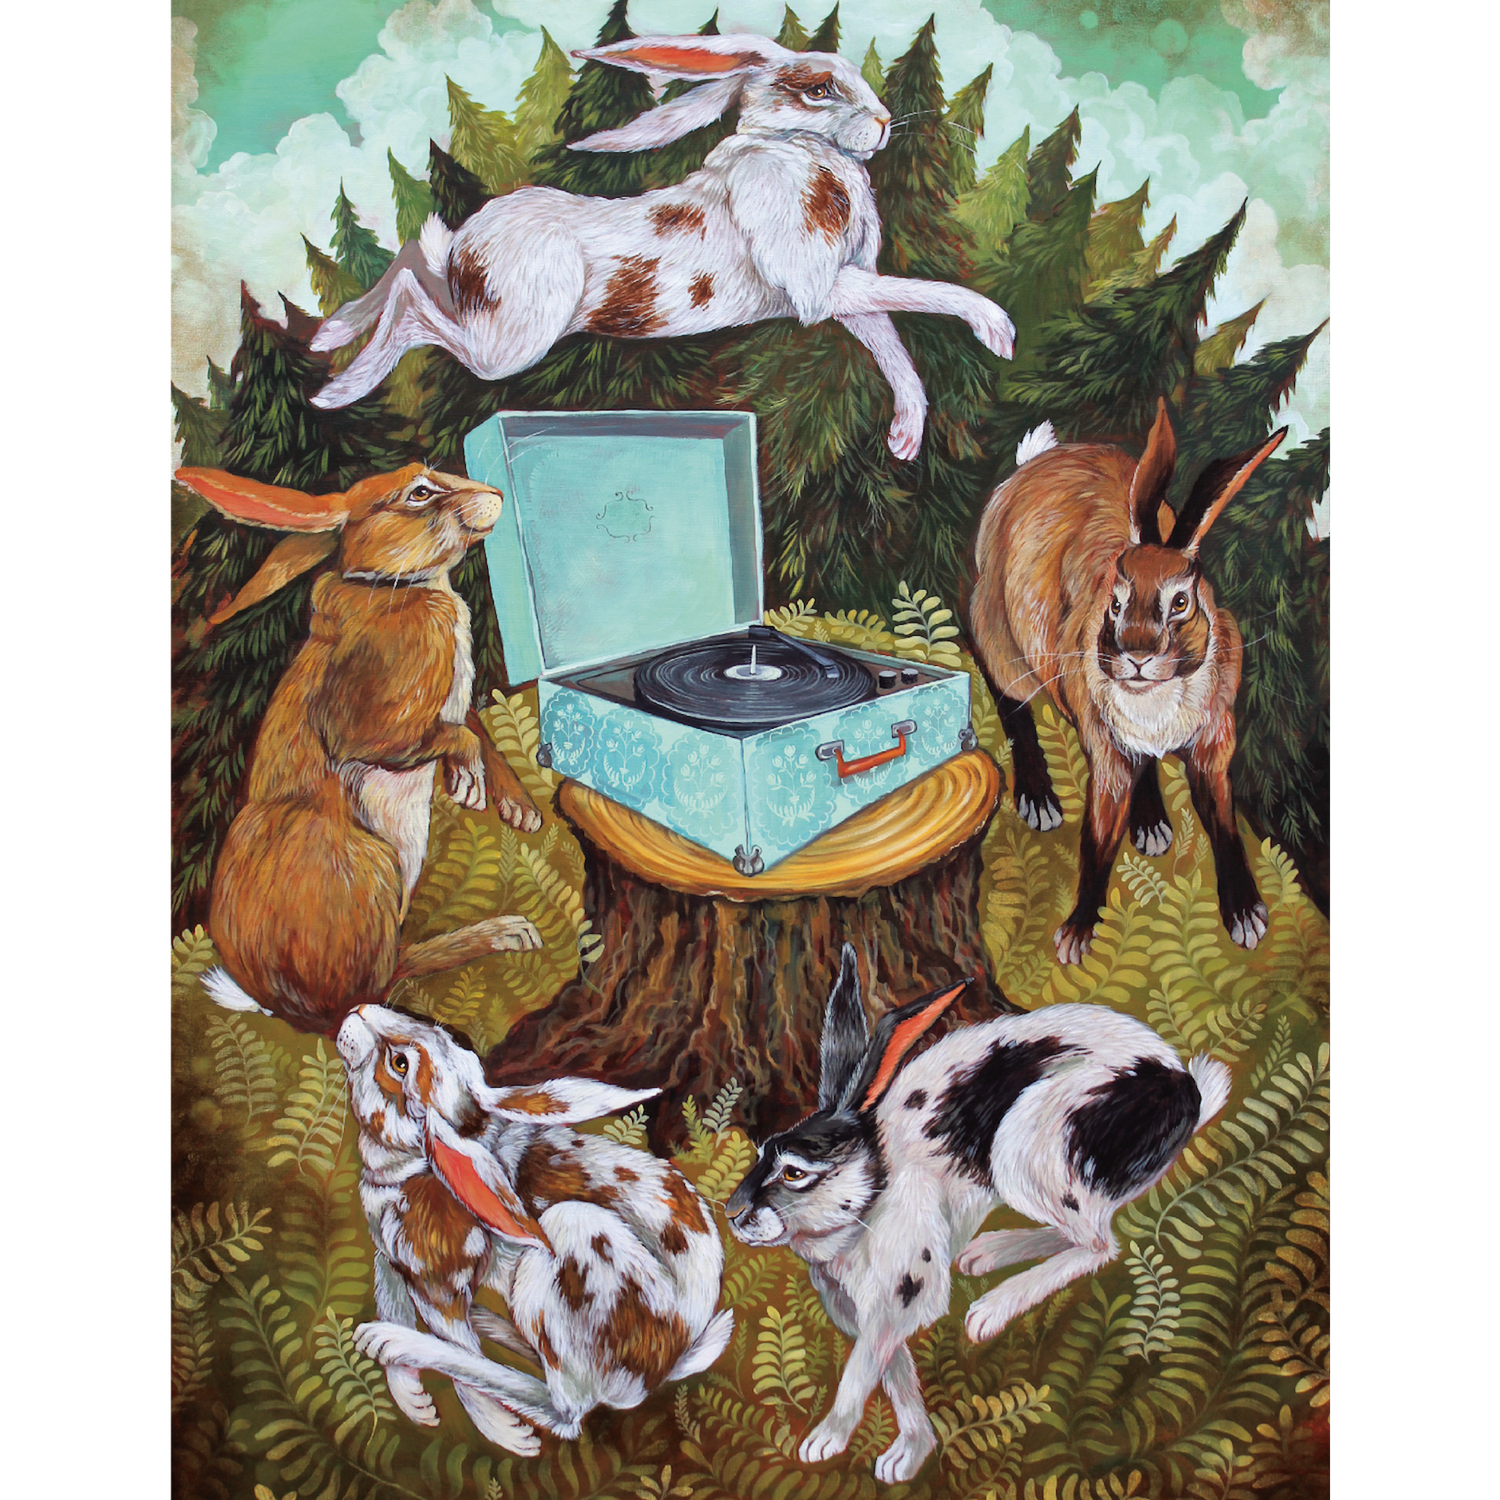 An artwork depicting Rabbit Dance Card with a record player in the woods by Hester &amp; Cook.